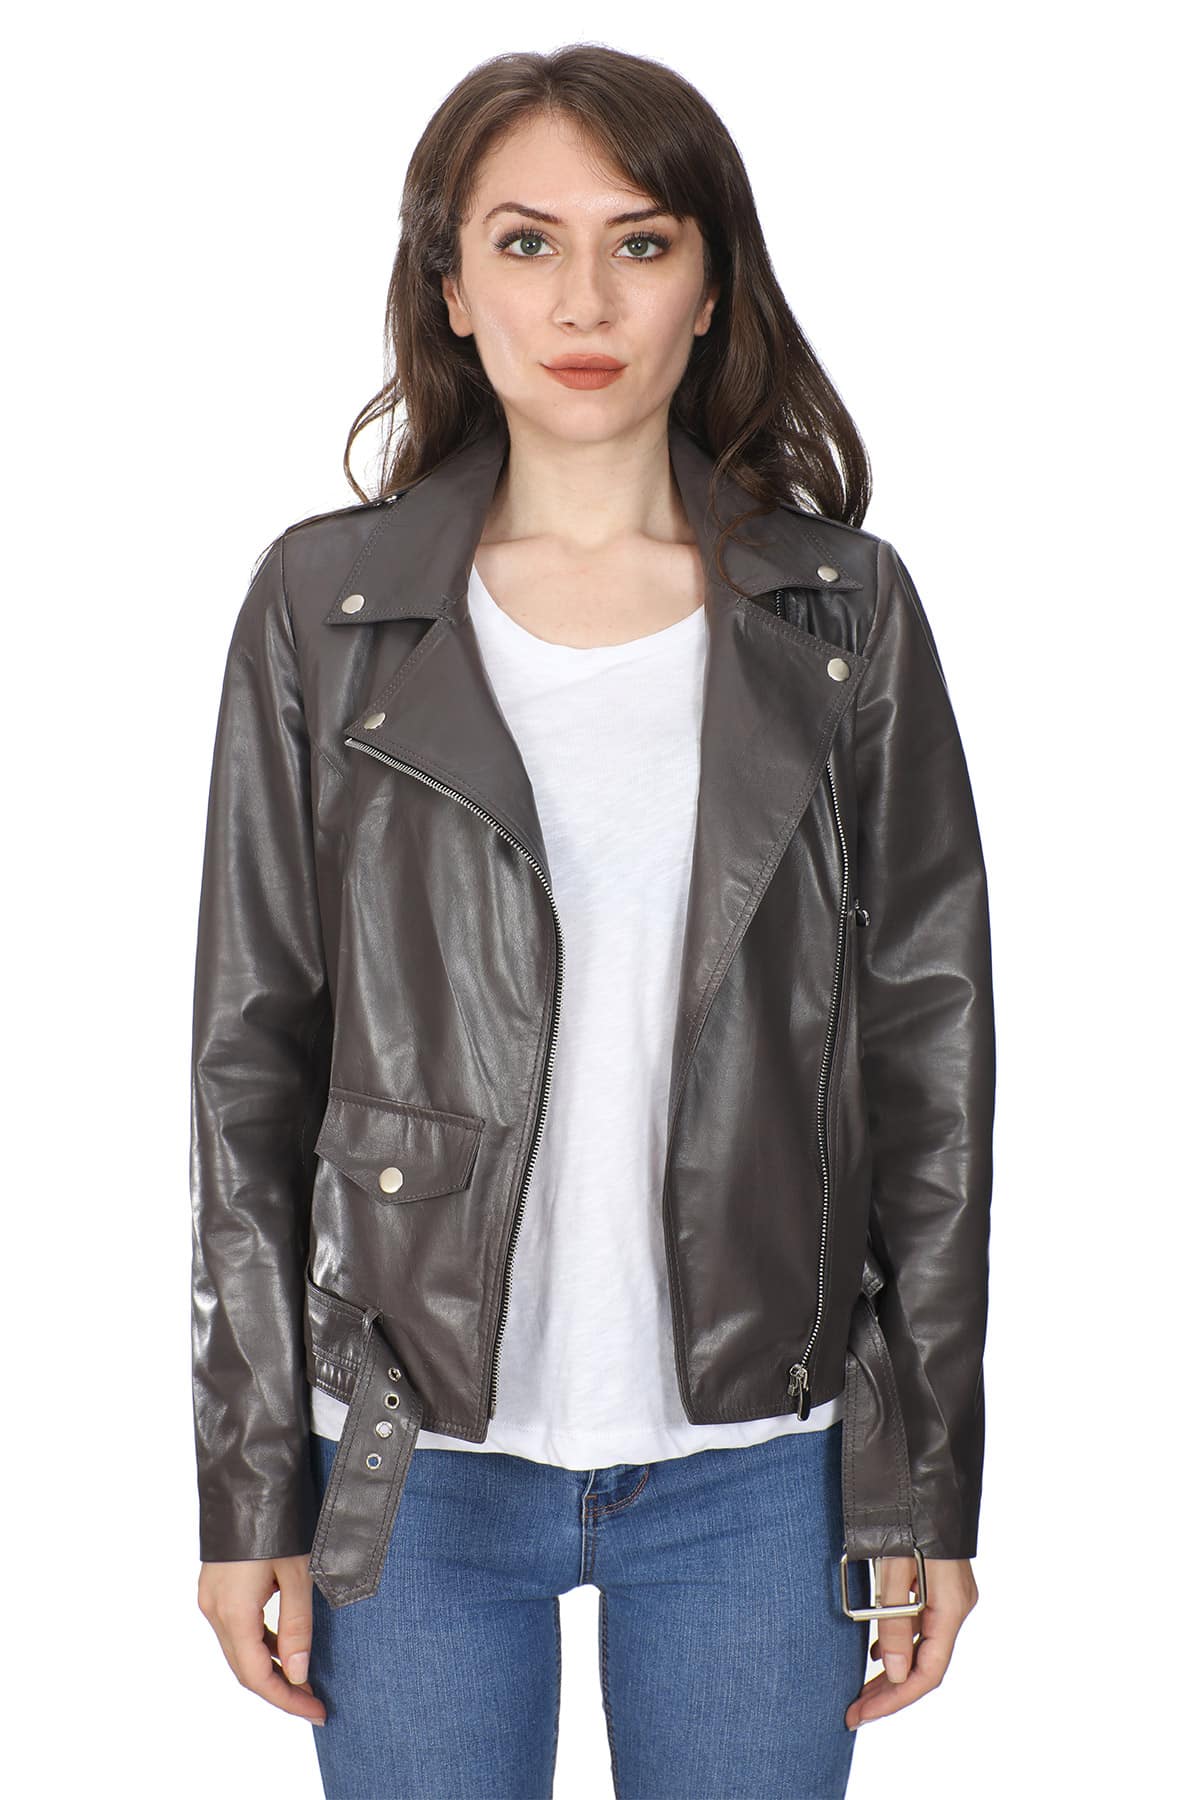 Brown Leather Jacket Female